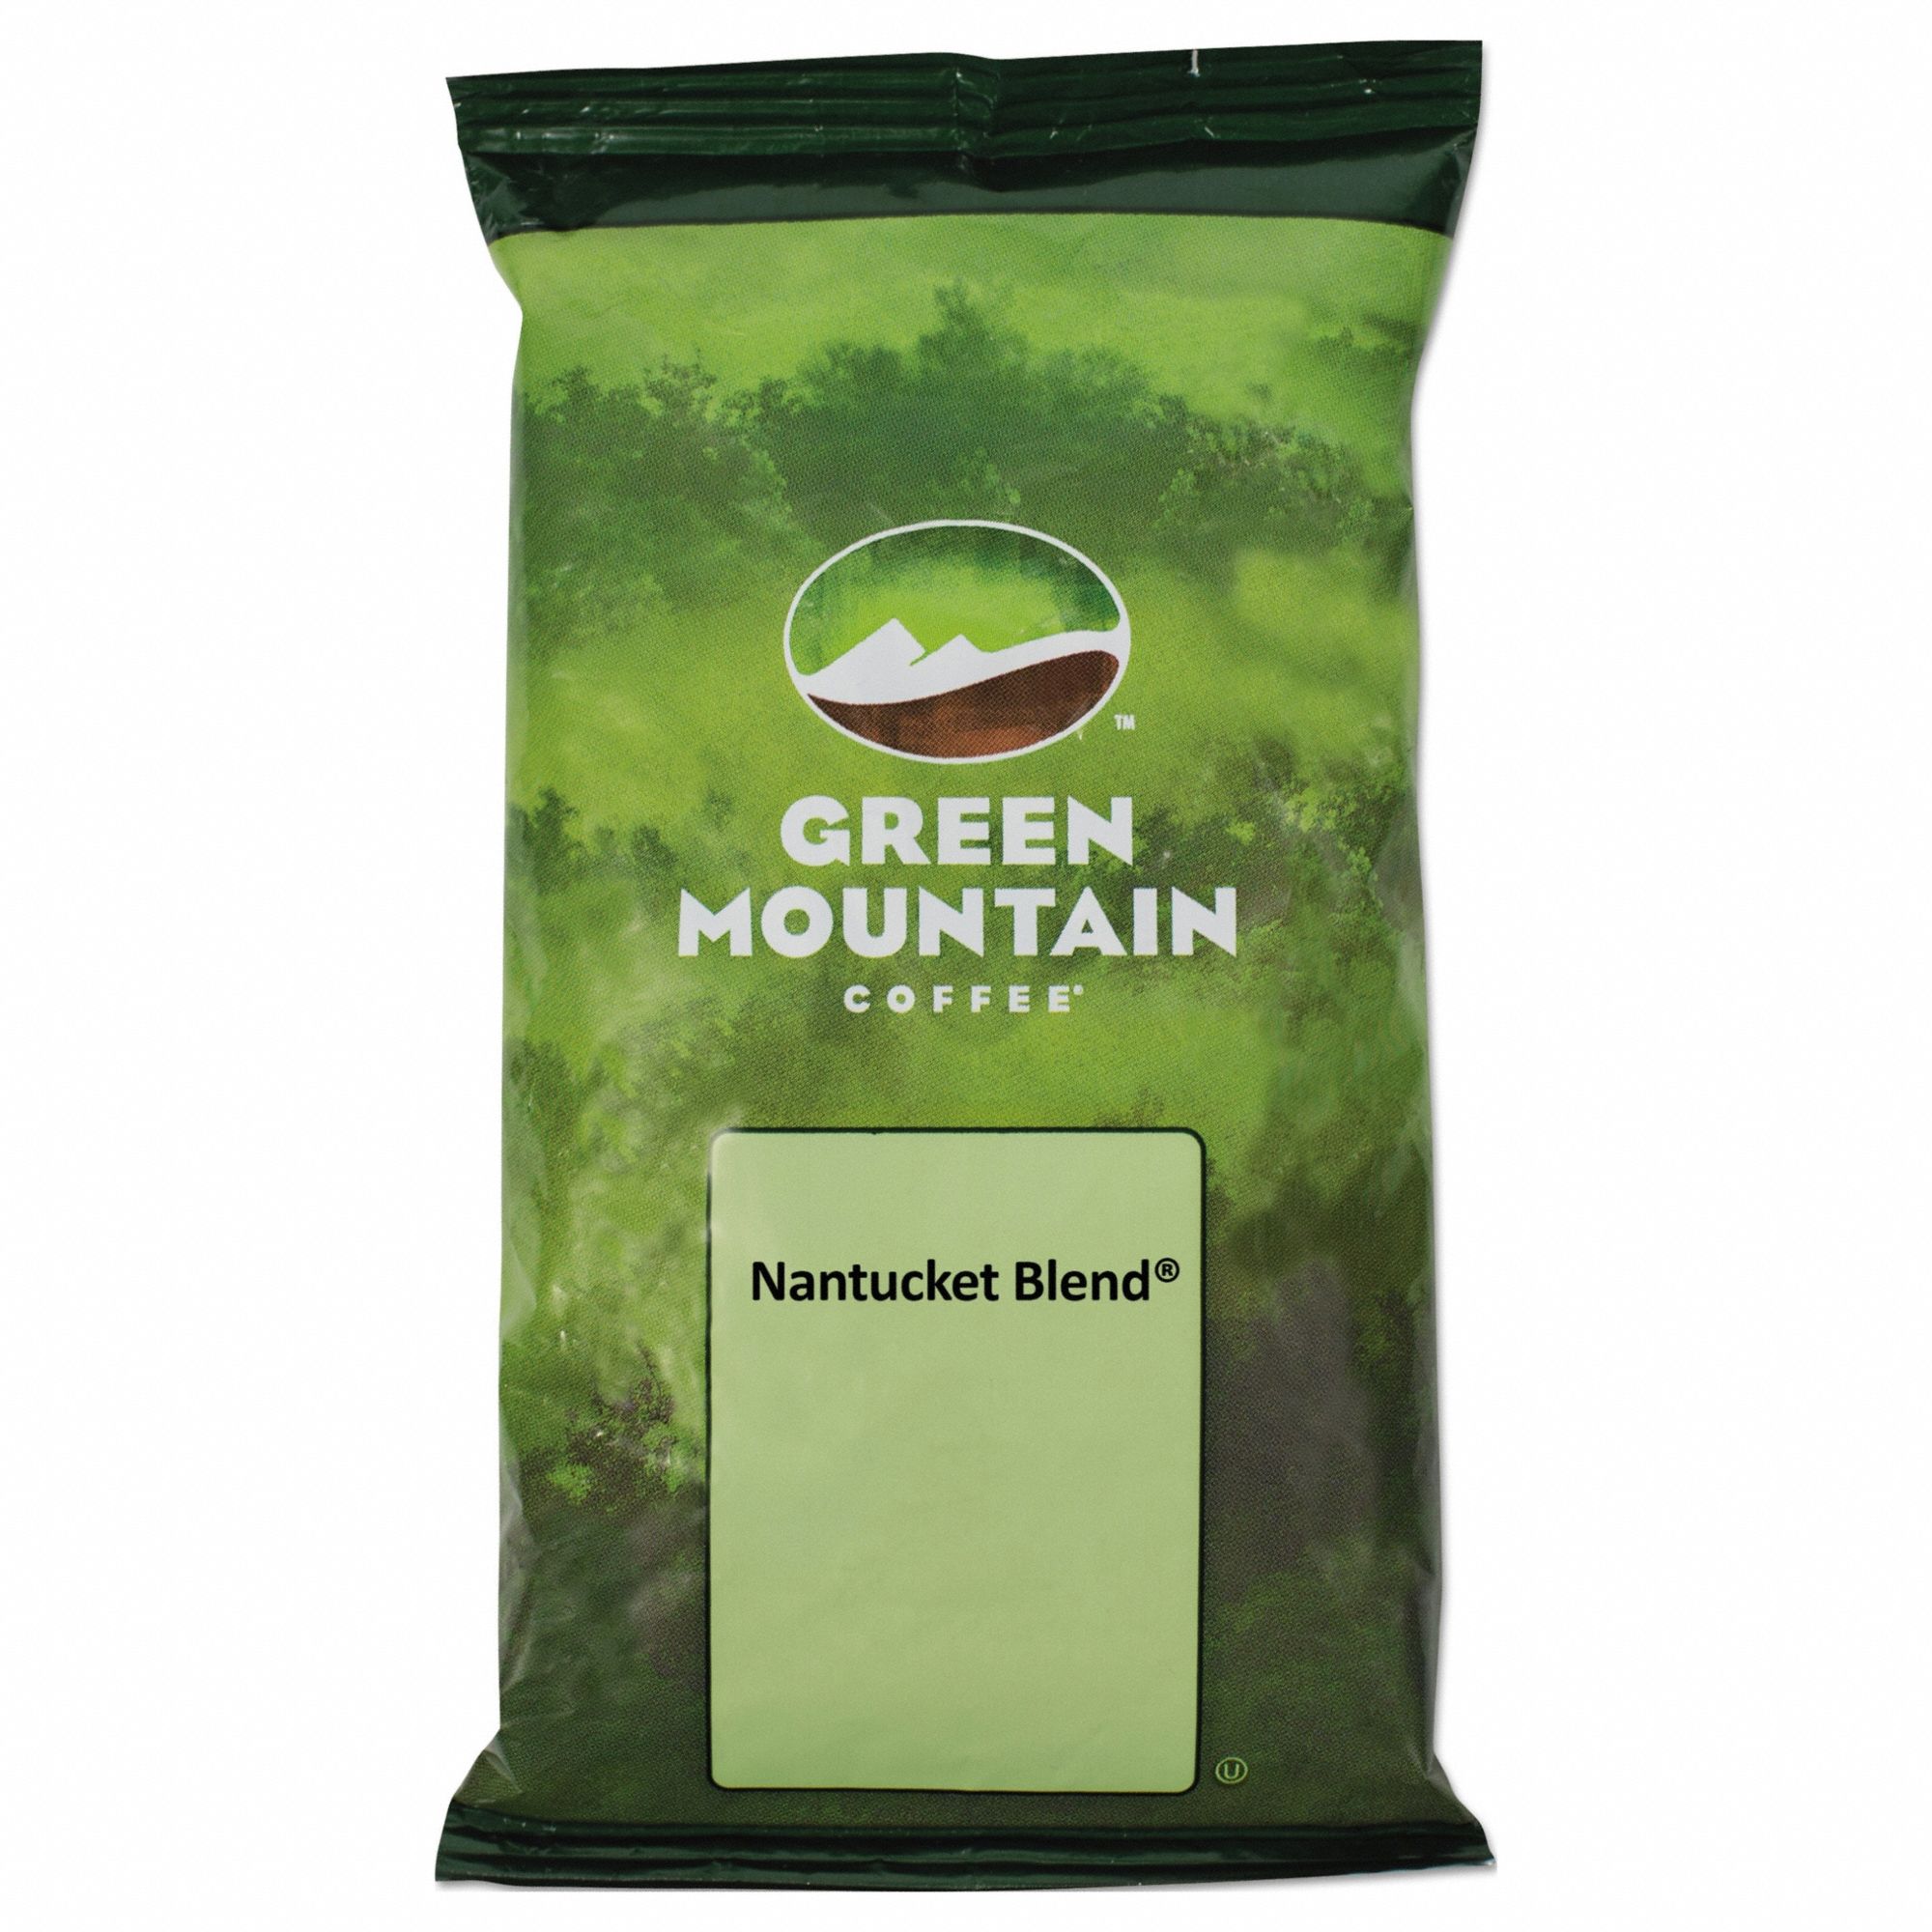 Coffee Fraction Pack: Caffeinated, Nantucket Blend®, Fraction Pack, 50 PK